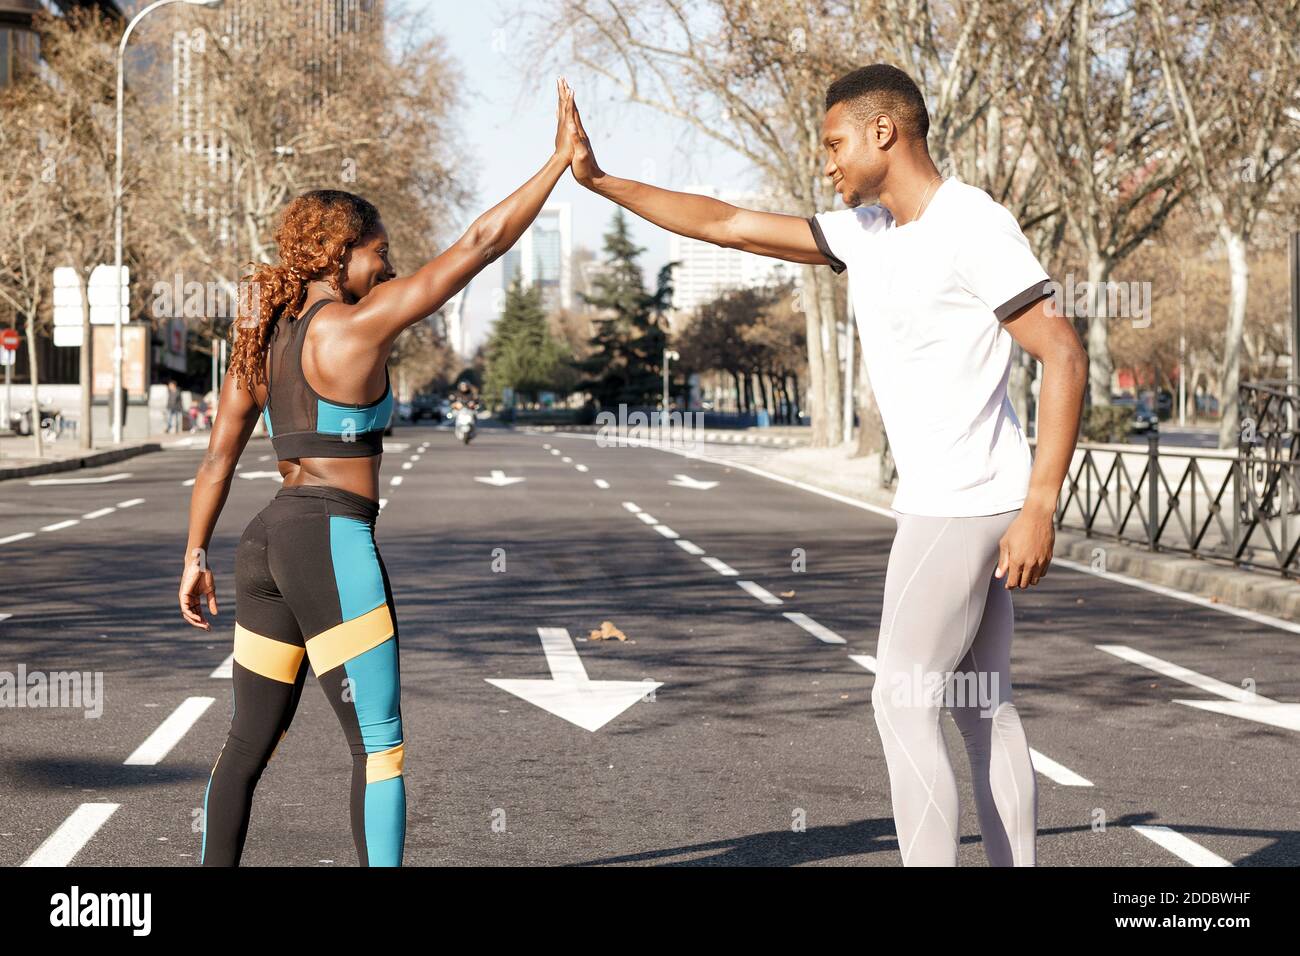 Athletes giving high five before race while standing on road at city Stock Photo